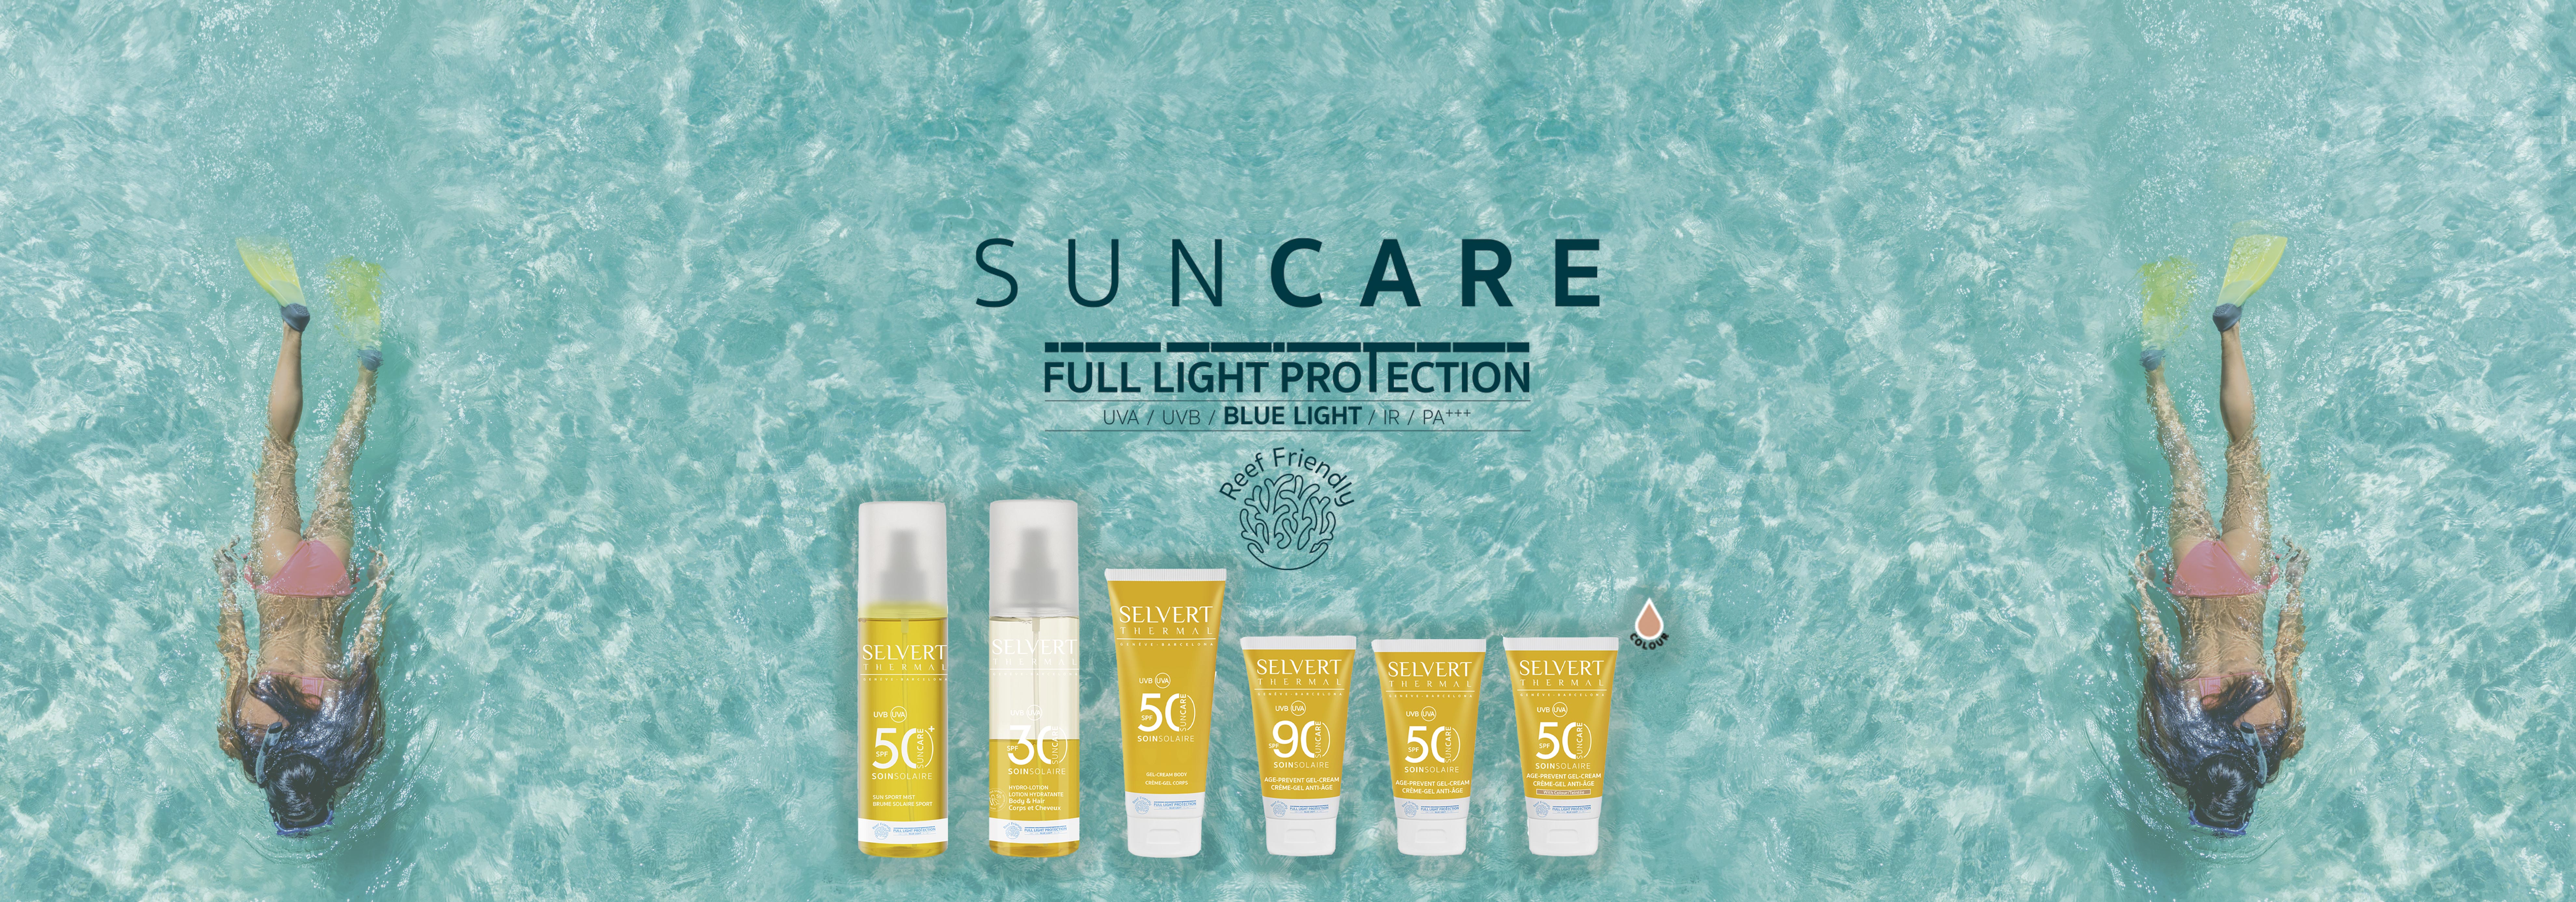 SUN CARE <p>WE PROTECT YOUR SKIN. WE PROTECT THE PLANET</p>
<p>&nbsp;</p>
<p>New facial and body sun care line providing latest-generation lightweight textures, protecting the skin from photoageing while preserving the marine ecosystem thanks to our Reef Friendly formula.<br />The entire range has been formulated with our revolutionary Full Light Protection technology as well as Pro-Vitamin D&reg;, an active ingredient that promotes the synthesis of Vitamin D in the skin, helping to improve its barrier function.<br />Products are fragranced with a delicious blend of citrus and vanilla notes and are water resistant.</p>
<p>&nbsp;</p>
<p>Thanks to this innovative technology, the skin is protected from a broad spectrum of radiation, preventing photoageing.</p>
<ul>
<li>UVB + UVA protection</li>
<li>IR protection (infrared radiation)</li>
<li>Blue light protection (electromagnetic waves emitted by screens)<br /><br /></li>
</ul>
<p style="text-align: center;">We have always taken care of your skin. Now we&rsquo;re also committed to the planet.</p>
<p><br />That&rsquo;s why the entire Selvert Thermal sun care range has been formulated to be <strong>100% free of Oxybenzone and Octinoxate</strong>, components that severely damage coral reefs around the world.</p>